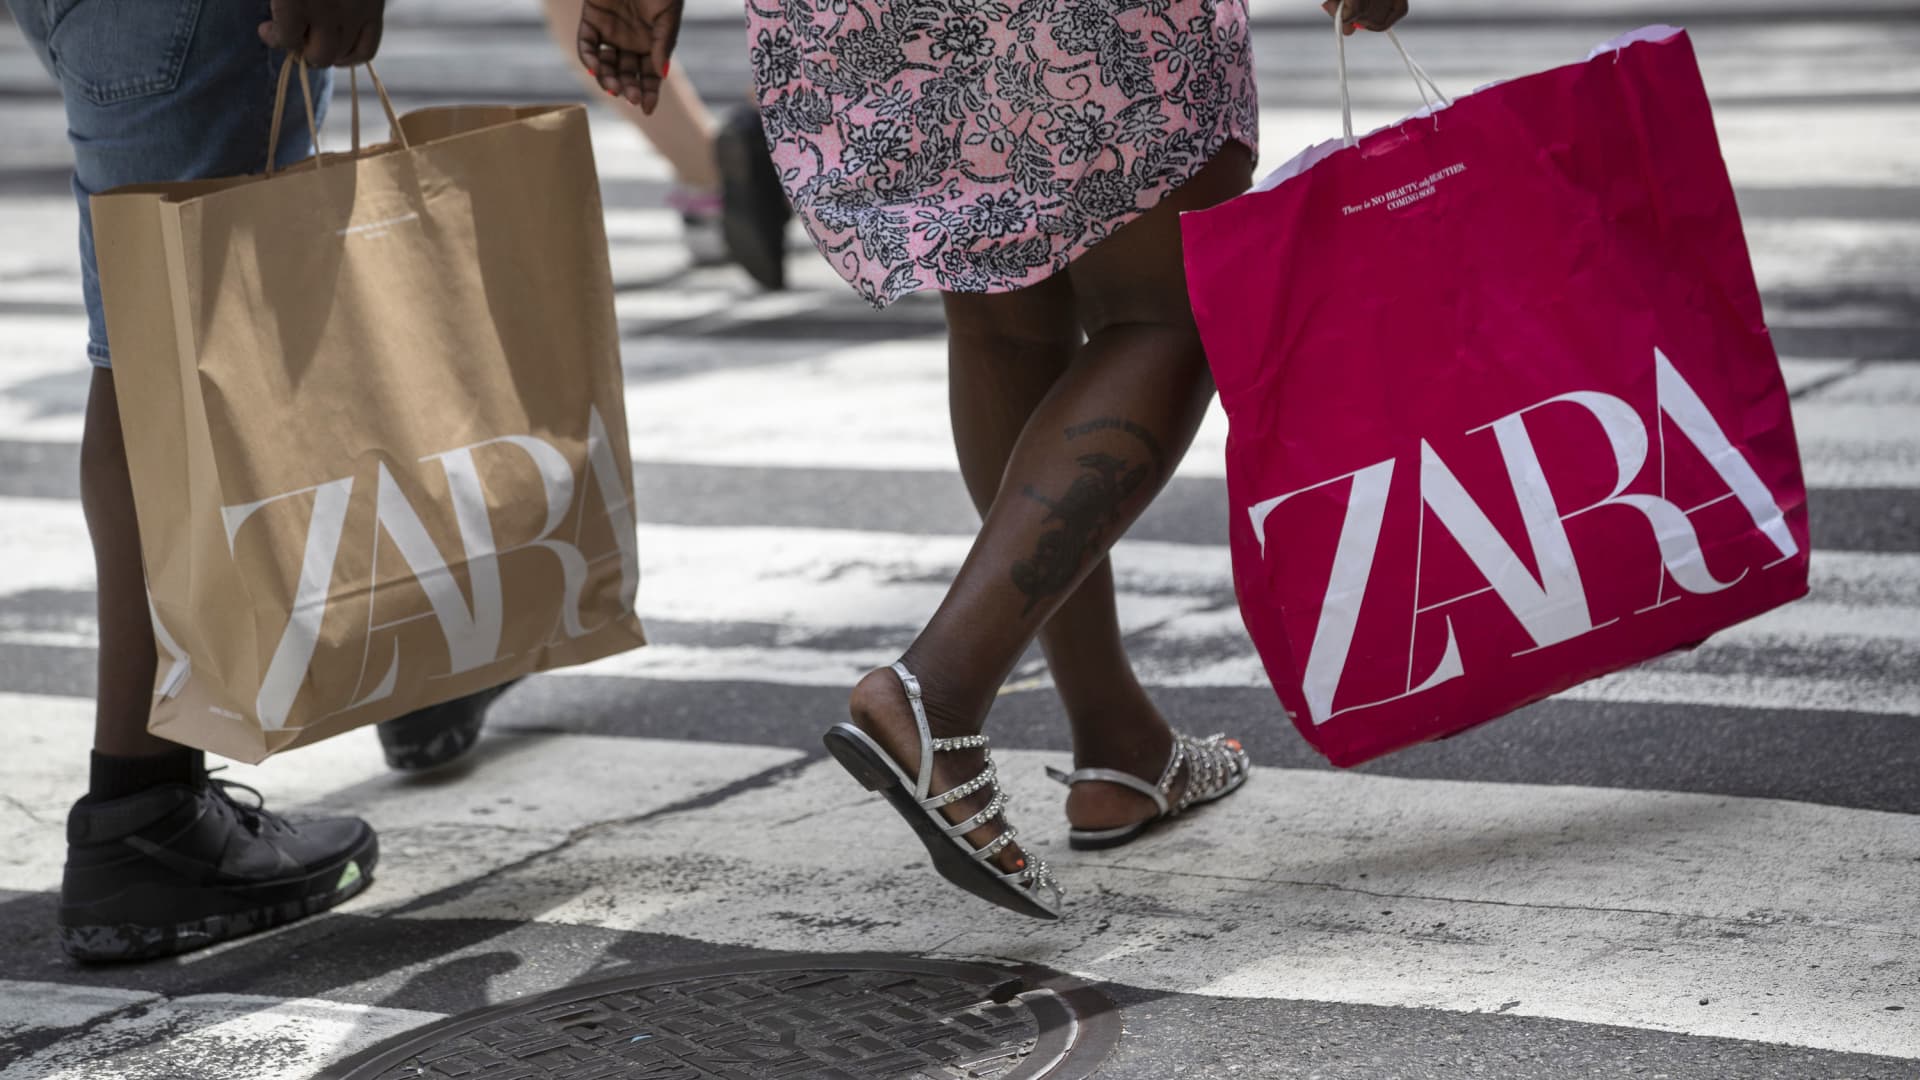 Shoppers carry Zara bags on Fifth Avenue in New York, on Saturday, May 22, 2021.